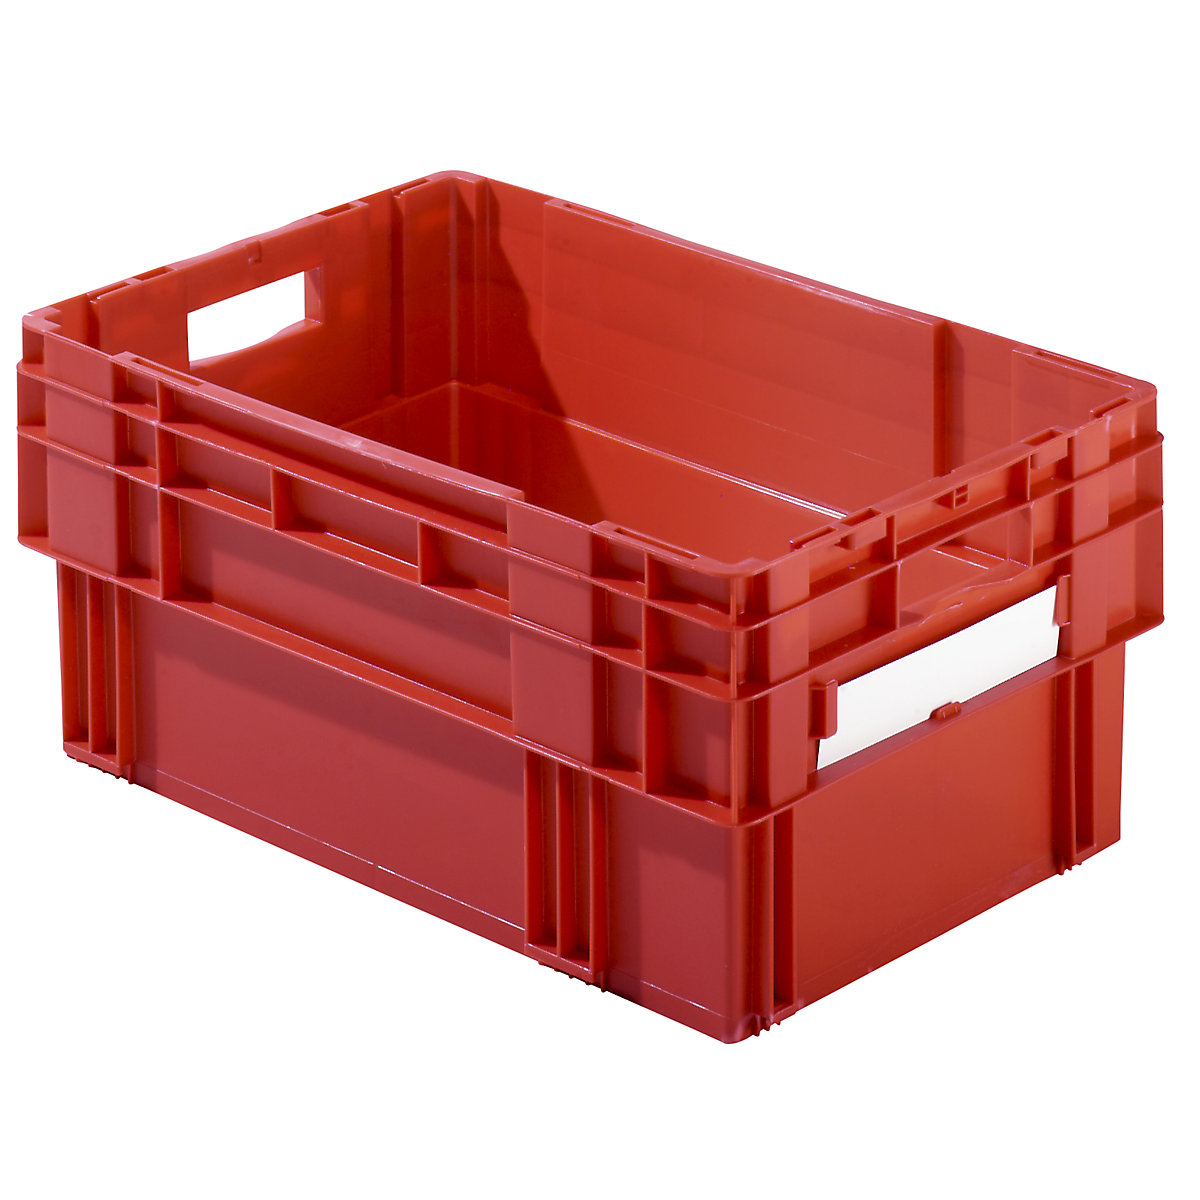 Stacking box, capacity 49 litres, solid walls and base, pack of 4, red